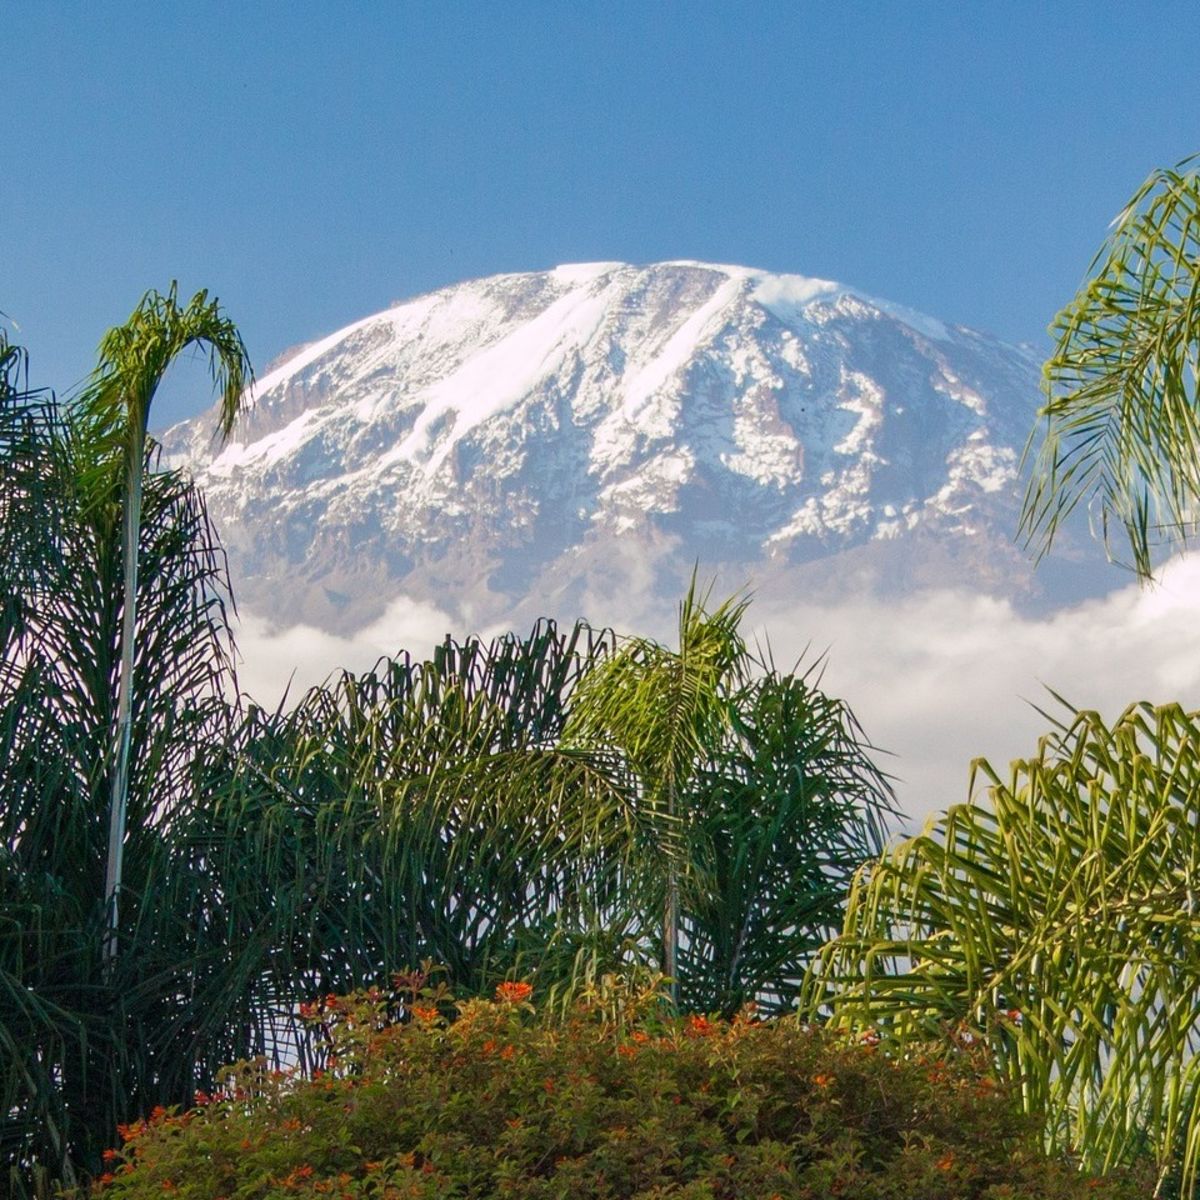 Mount Kilimanjaro seen from a distance with subtropical vegetation framing the snowy peak in the distance